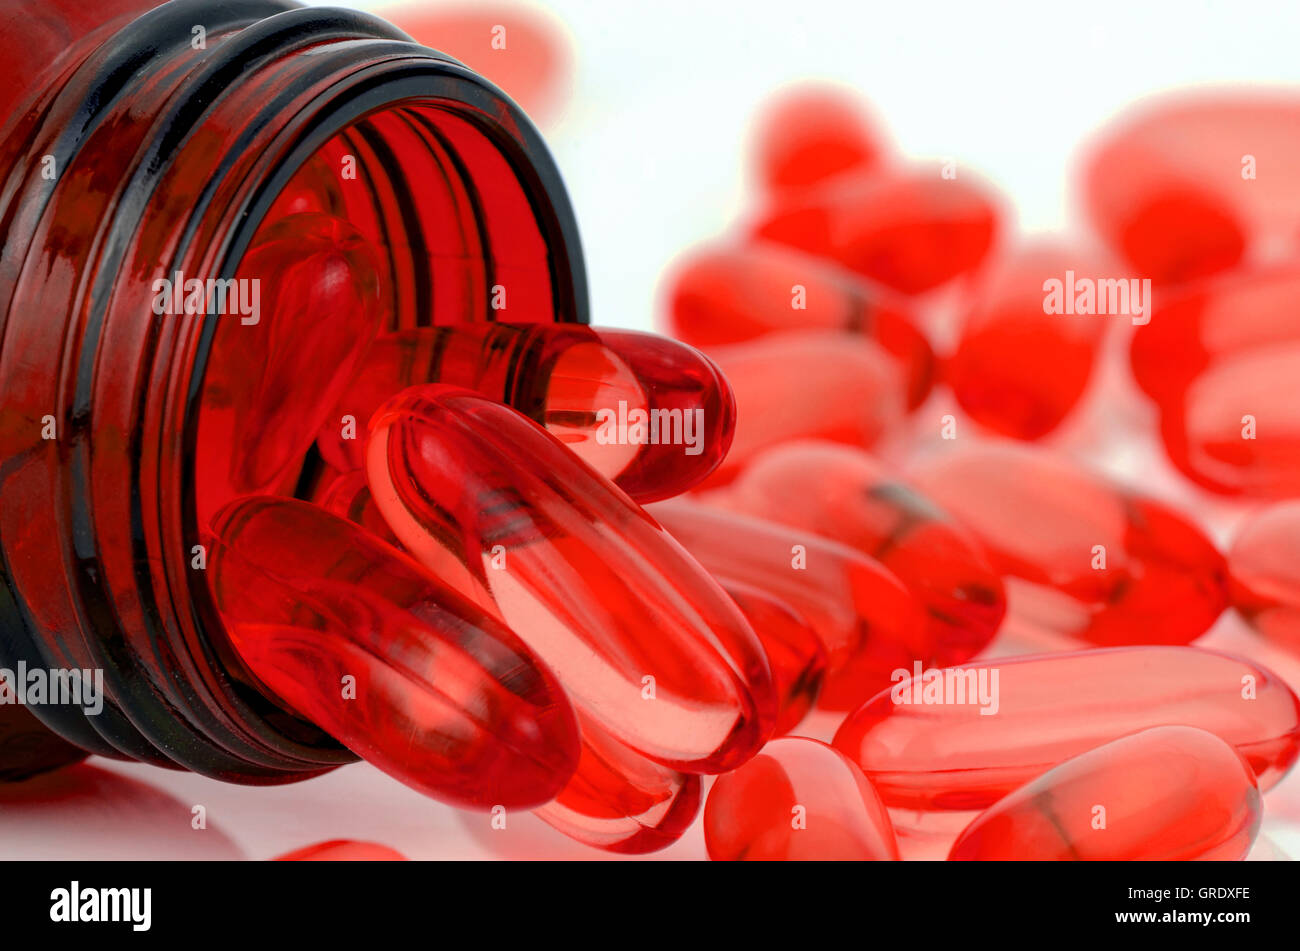 Red soft gelatin capsule use in pharmaceutical manufacturing for contain oily drug and nutritional supplement like vitamin A,D,E Stock Photo